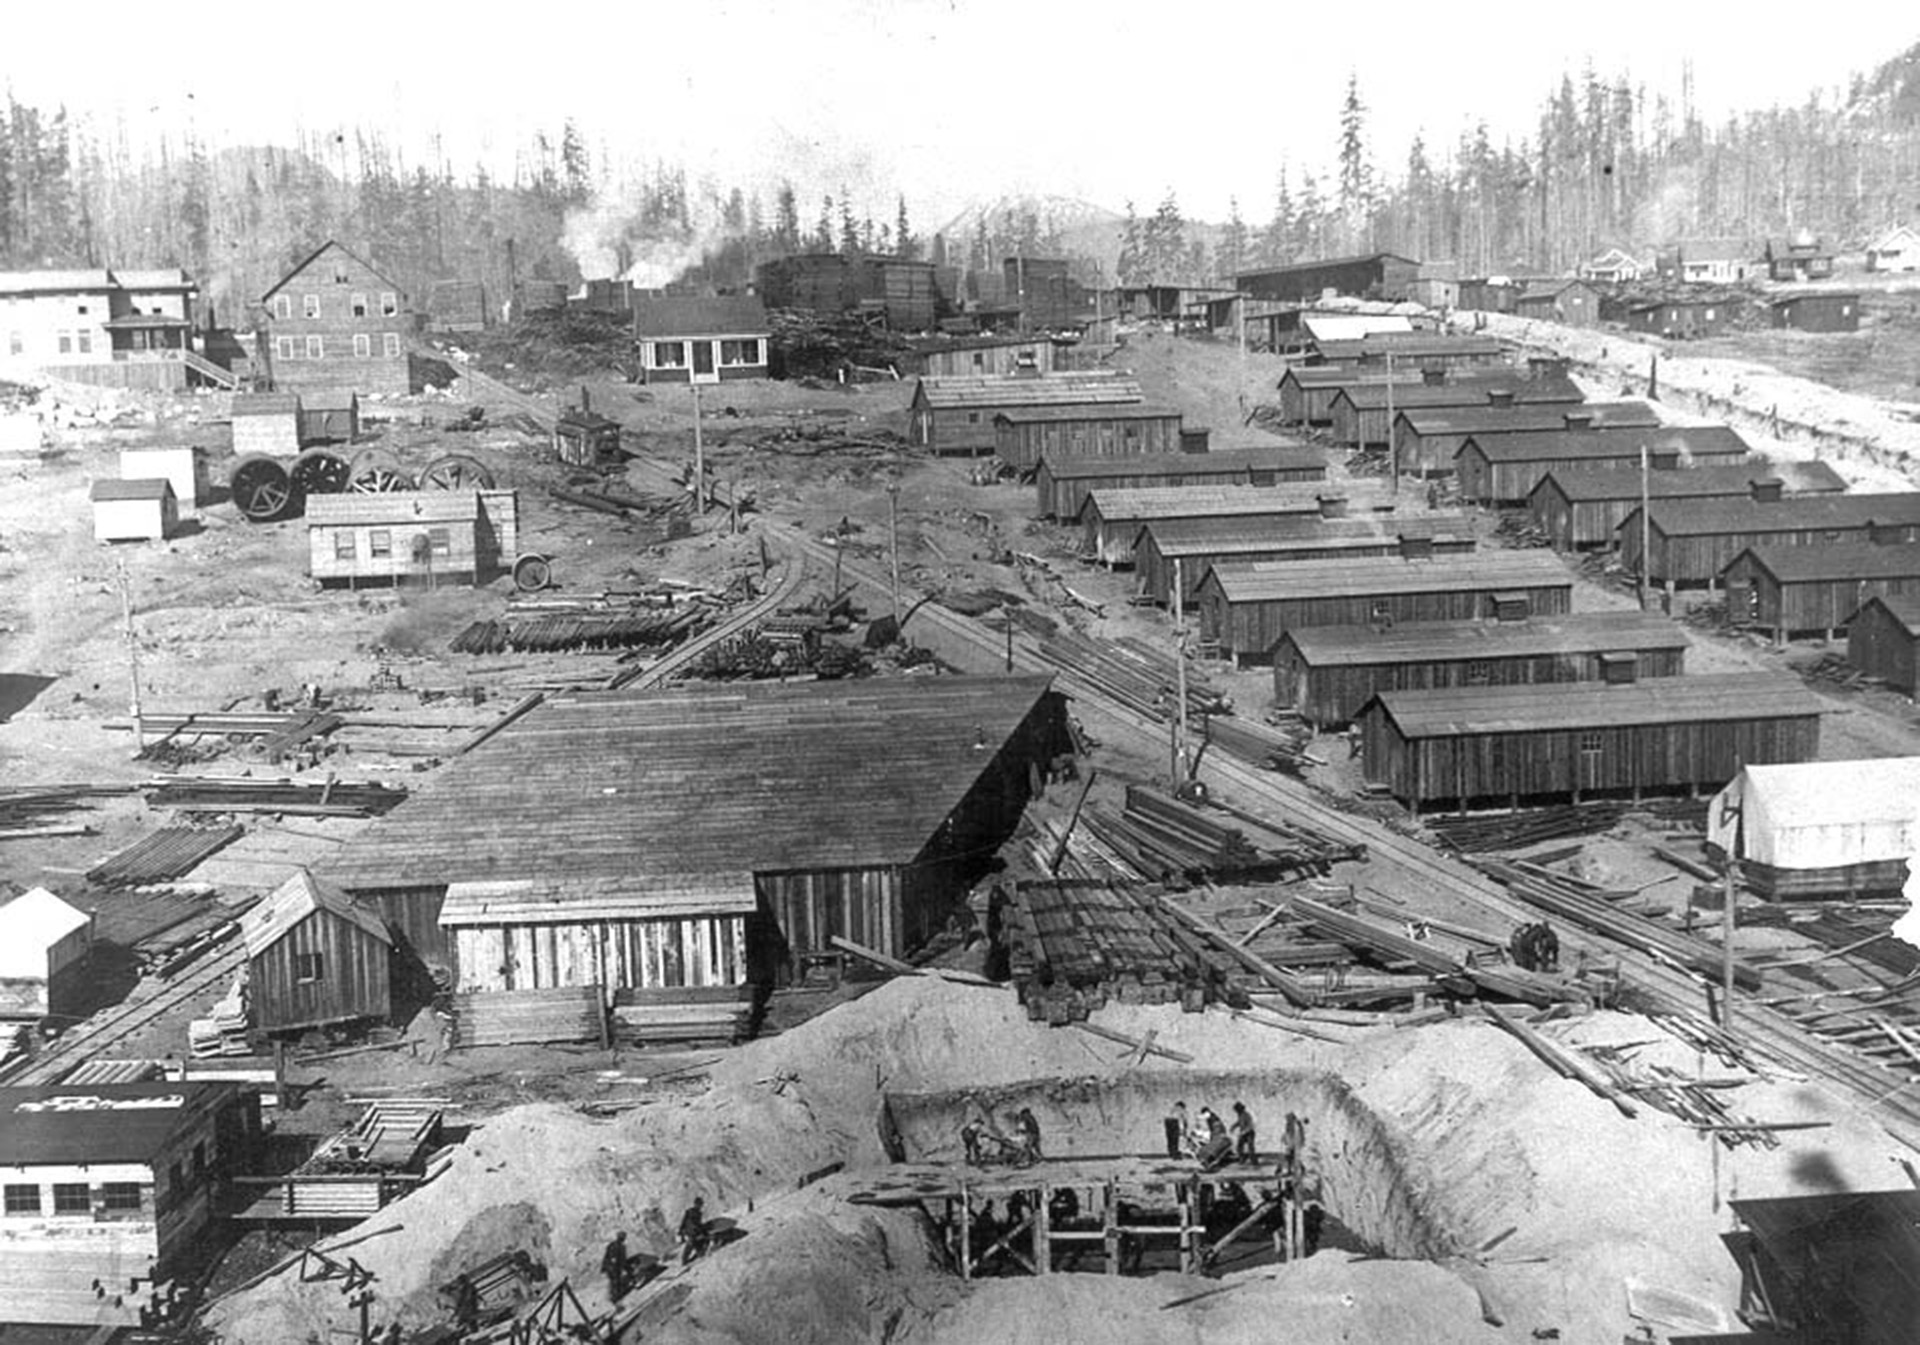 The Powell River Company Townsite, 1910.